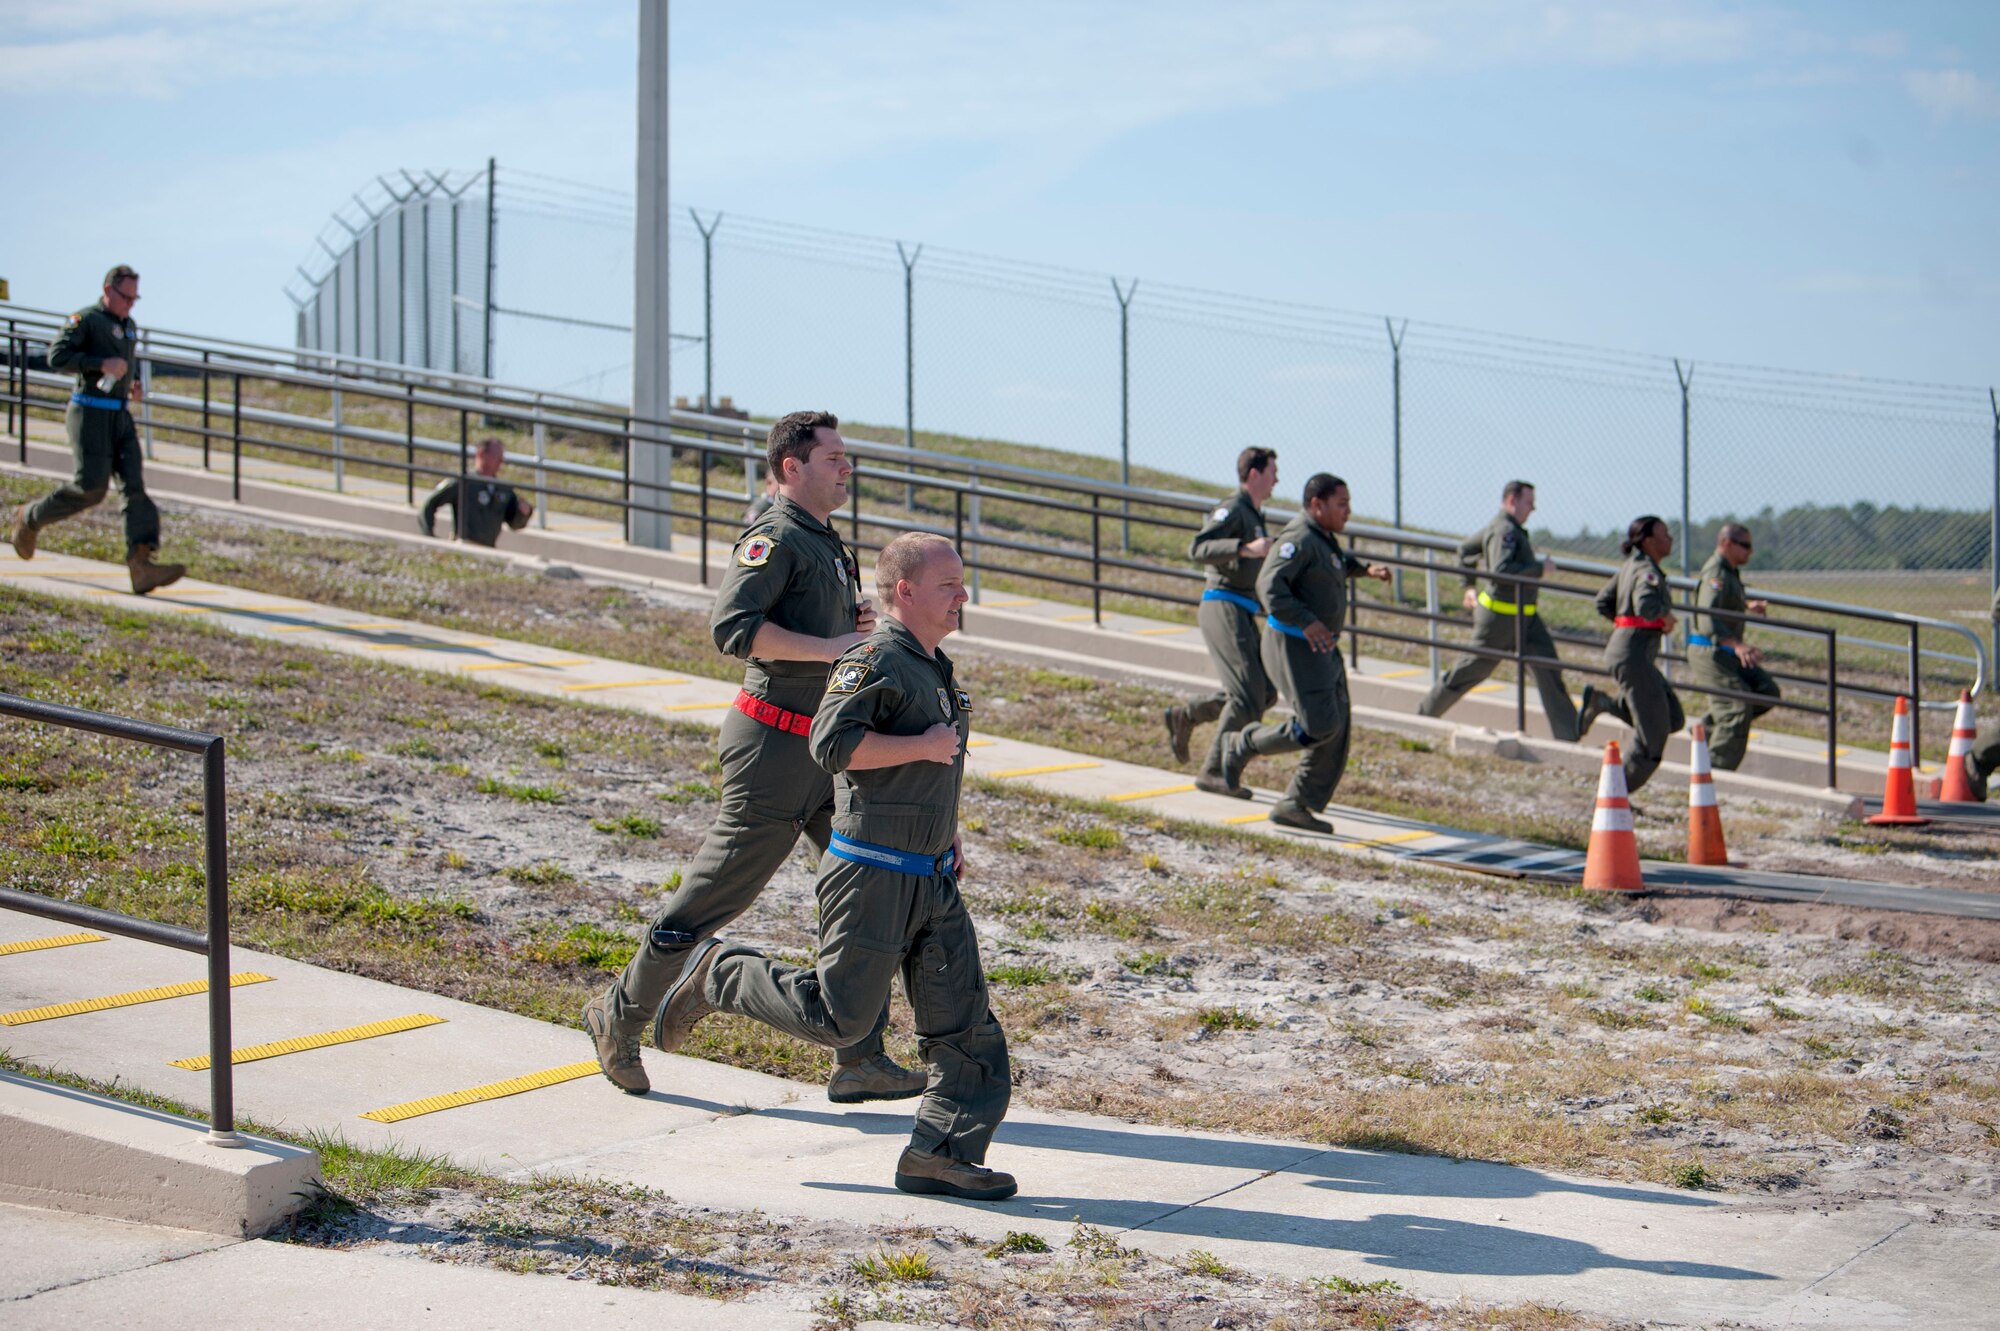 Aircrew members assigned to the 91st and 50th Air Refueling Squadrons sprint to their aircraft during an operational readiness exercise alert response at MacDill Air Force Base, Fla., Feb. 9, 2019. Total force Airmen from the 6th Air Mobility Wing and 927th Air Refueling Wing participated in a three-day readiness exercise designed to emphasize the importance of combat skills effectiveness training and ensure Airmen are prepared for any potential contingencies.